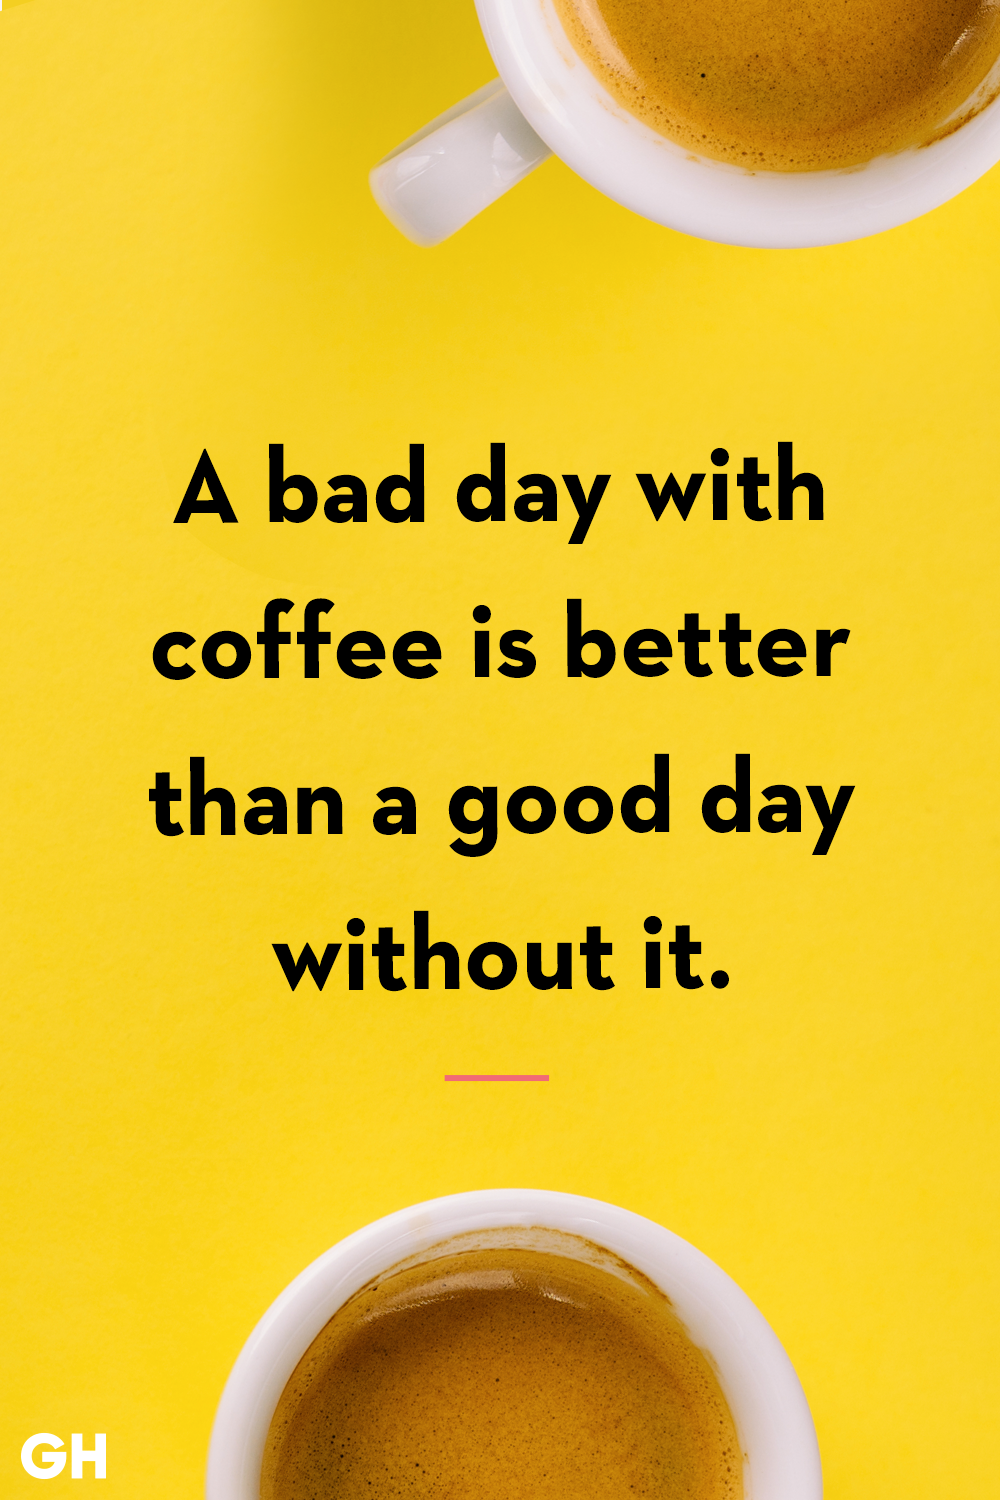 40 Funny Coffee Quotes - Best Coffee Quotes and Sayings